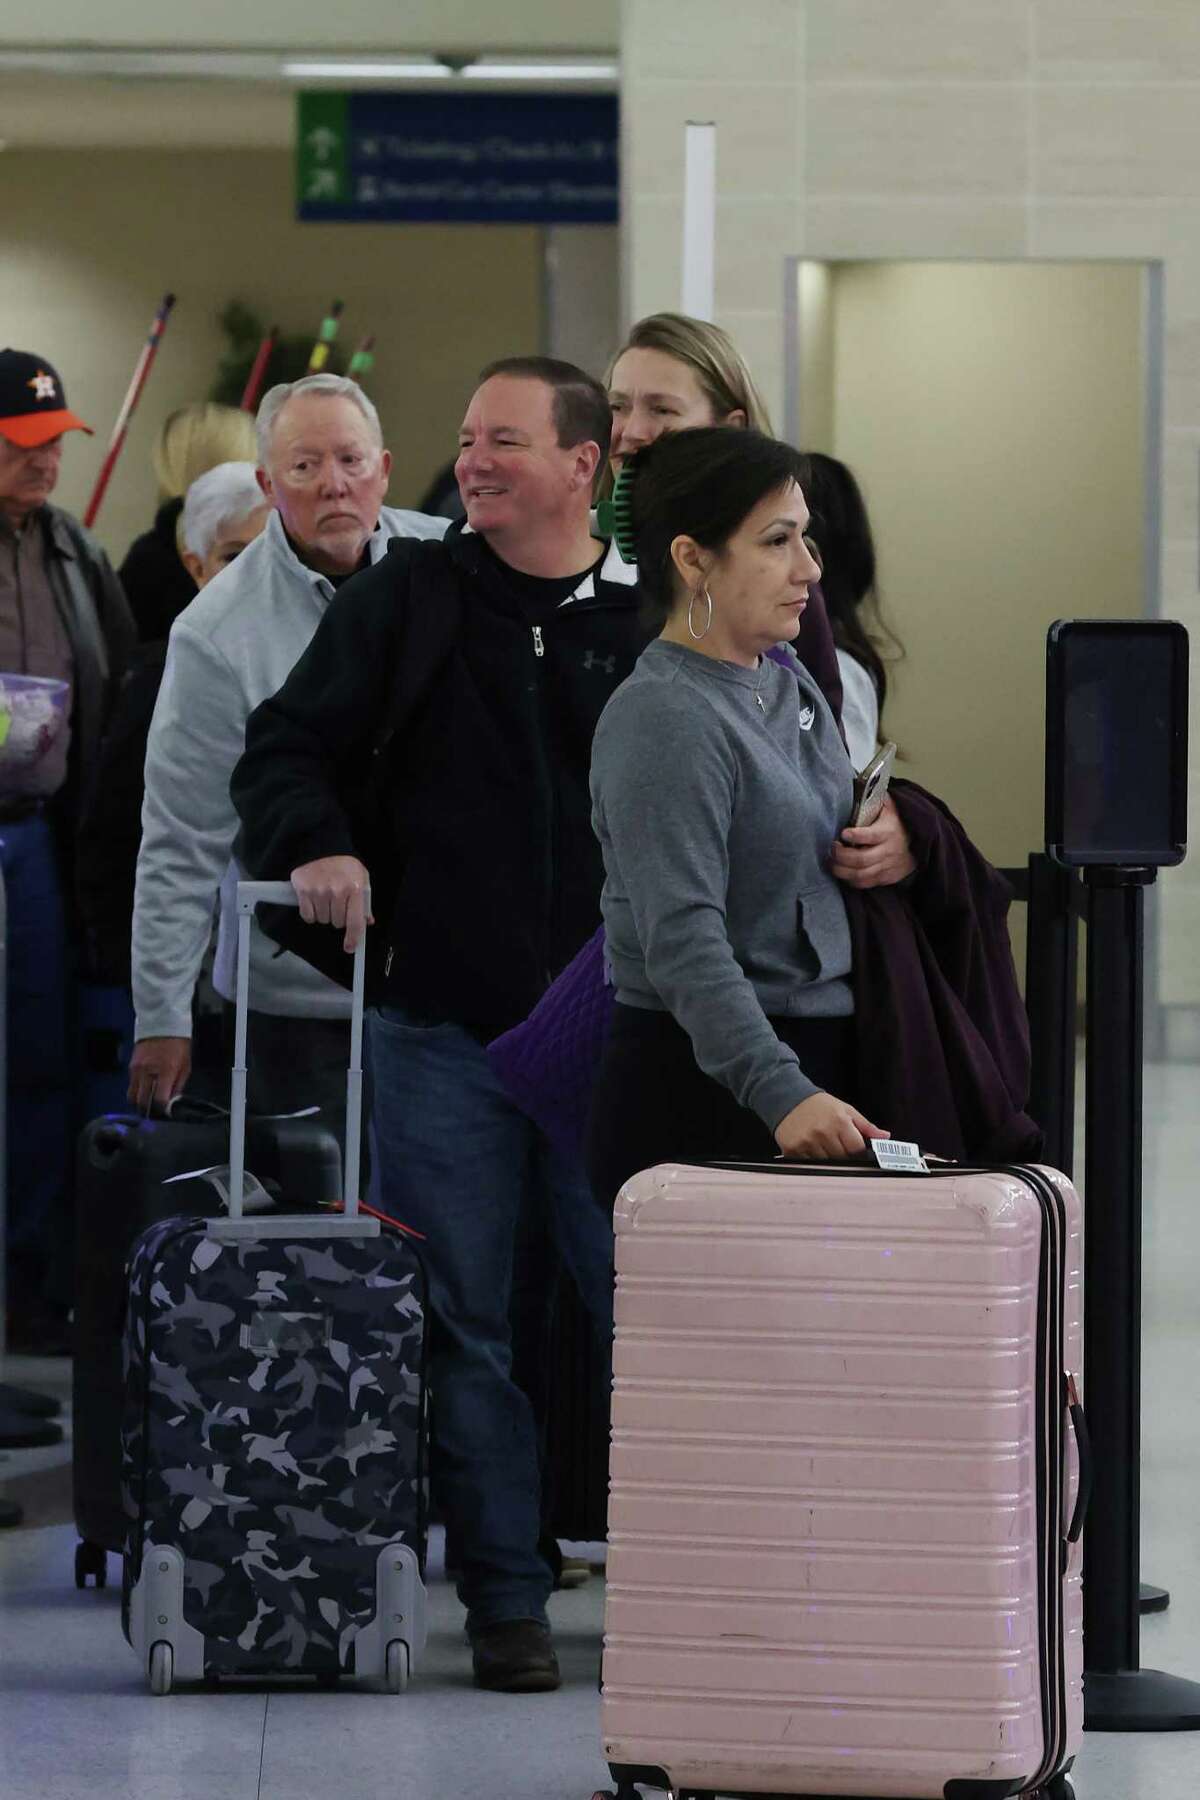 Passengers at the San Antonio International Airport, Tuesday, Jan. 31, 2023. A strong cold front has brought temperatures into the low 30’s causing icy road conditions. Southwest Airlines cancelled several flights to Dallas due to the weather.